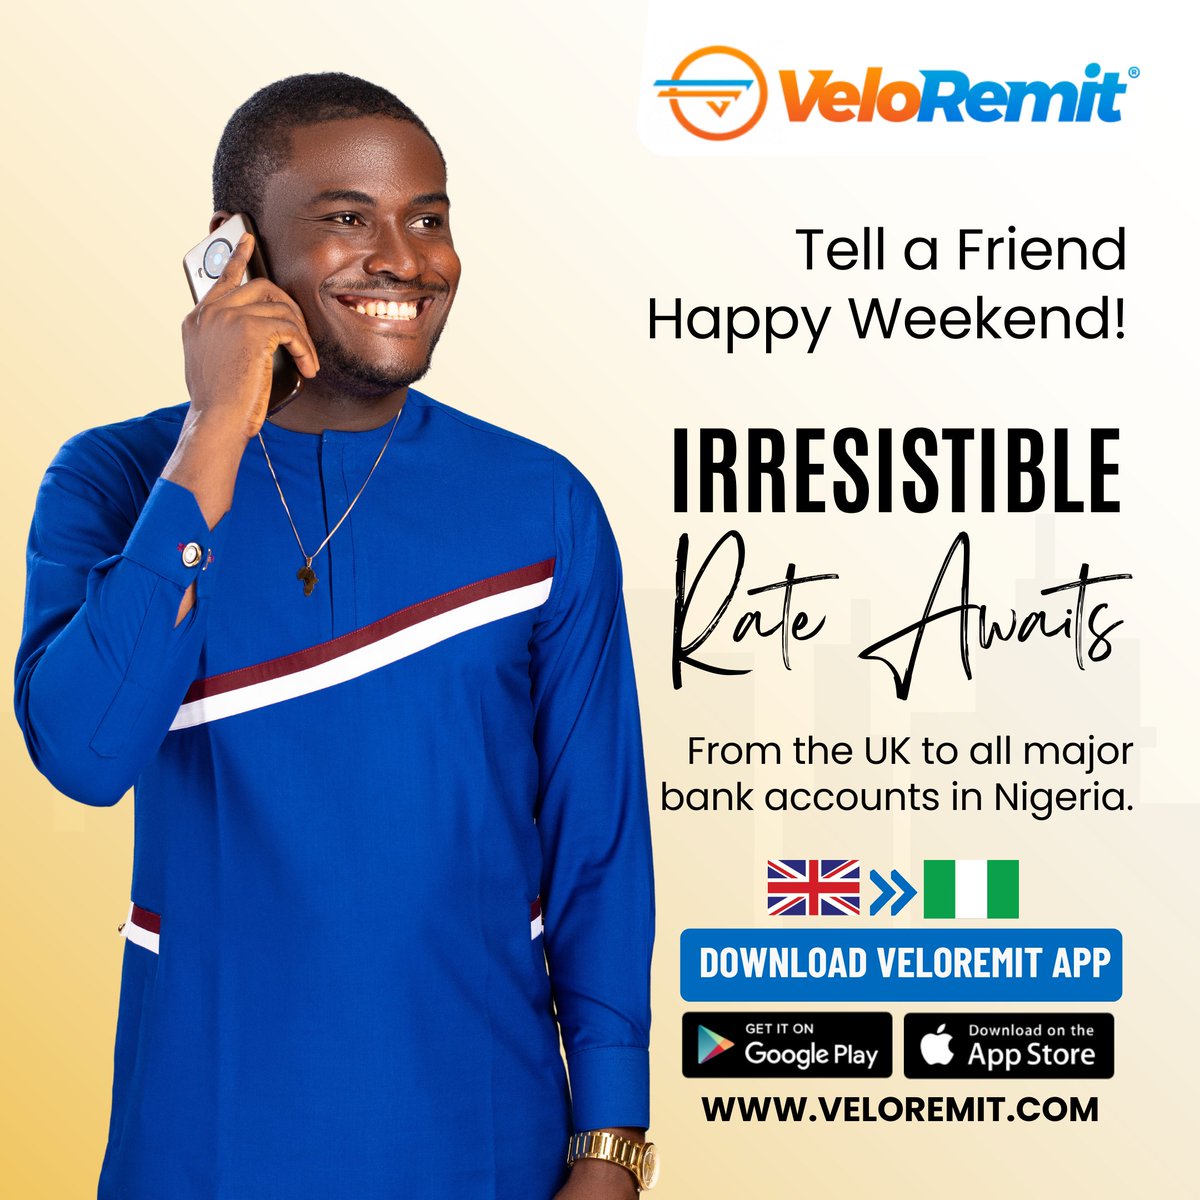 🌟 Happy weekend, everyone! 🎉 Spread the joy by letting friends and family know about VeloRemit’s irresistible rates. 💸 Don't miss out – Download now! 🇬🇧🇳🇬 #HappyWeekend #veloremit #etioba_velo✅ #irresistible #rates #spreadtheword #weekendvibes #downloadnow